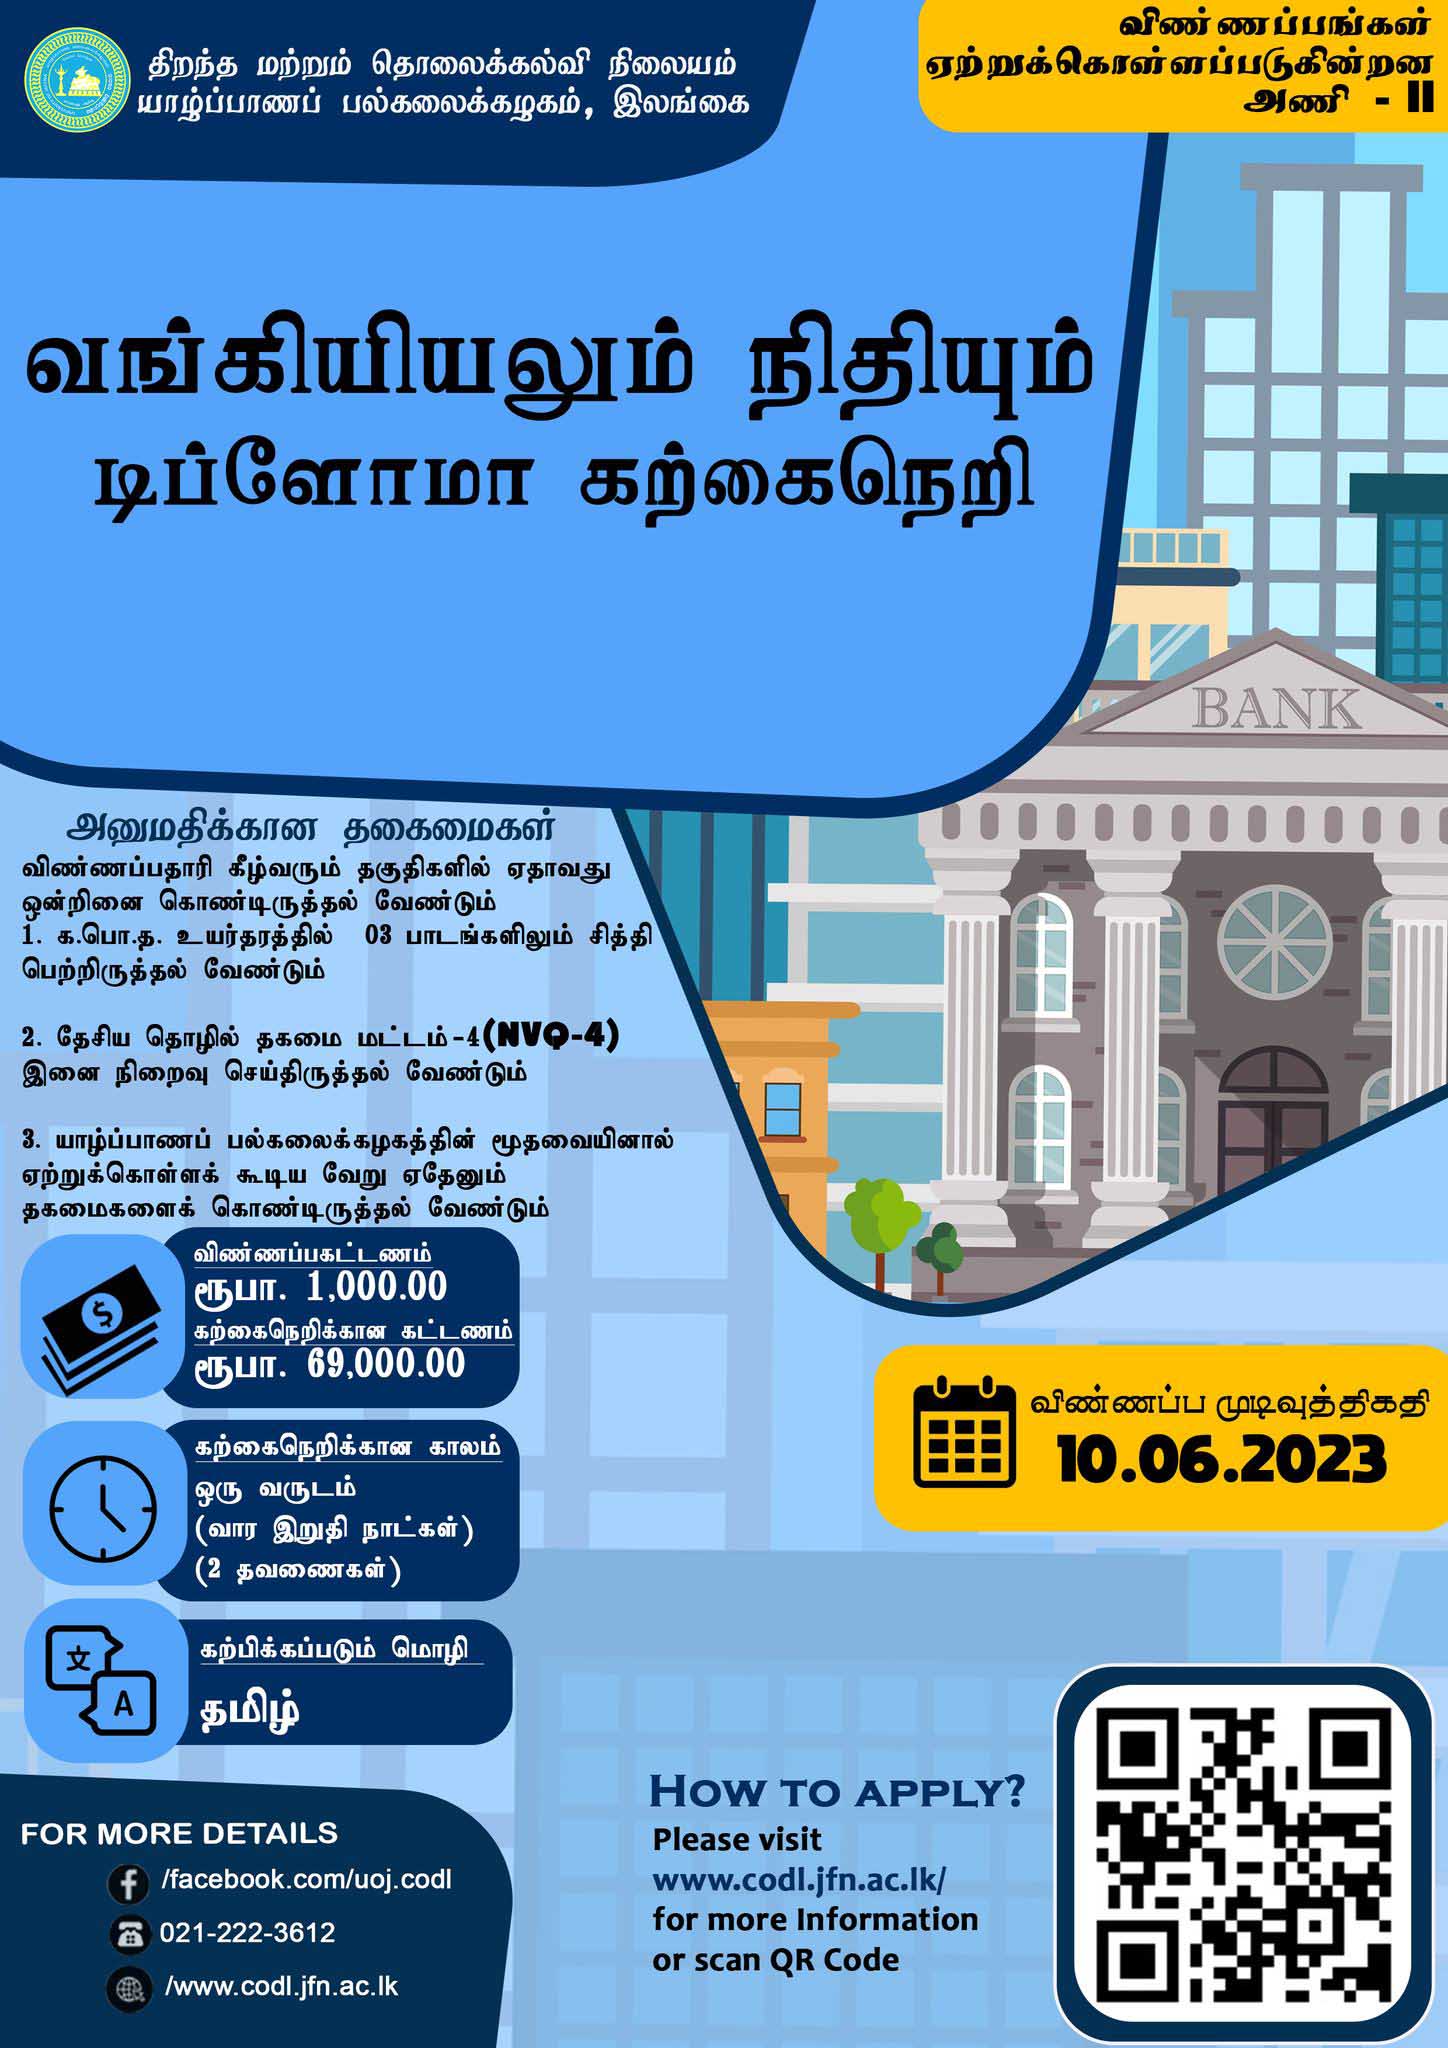 Diploma in Banking and Finance 2023 - University of Jaffna